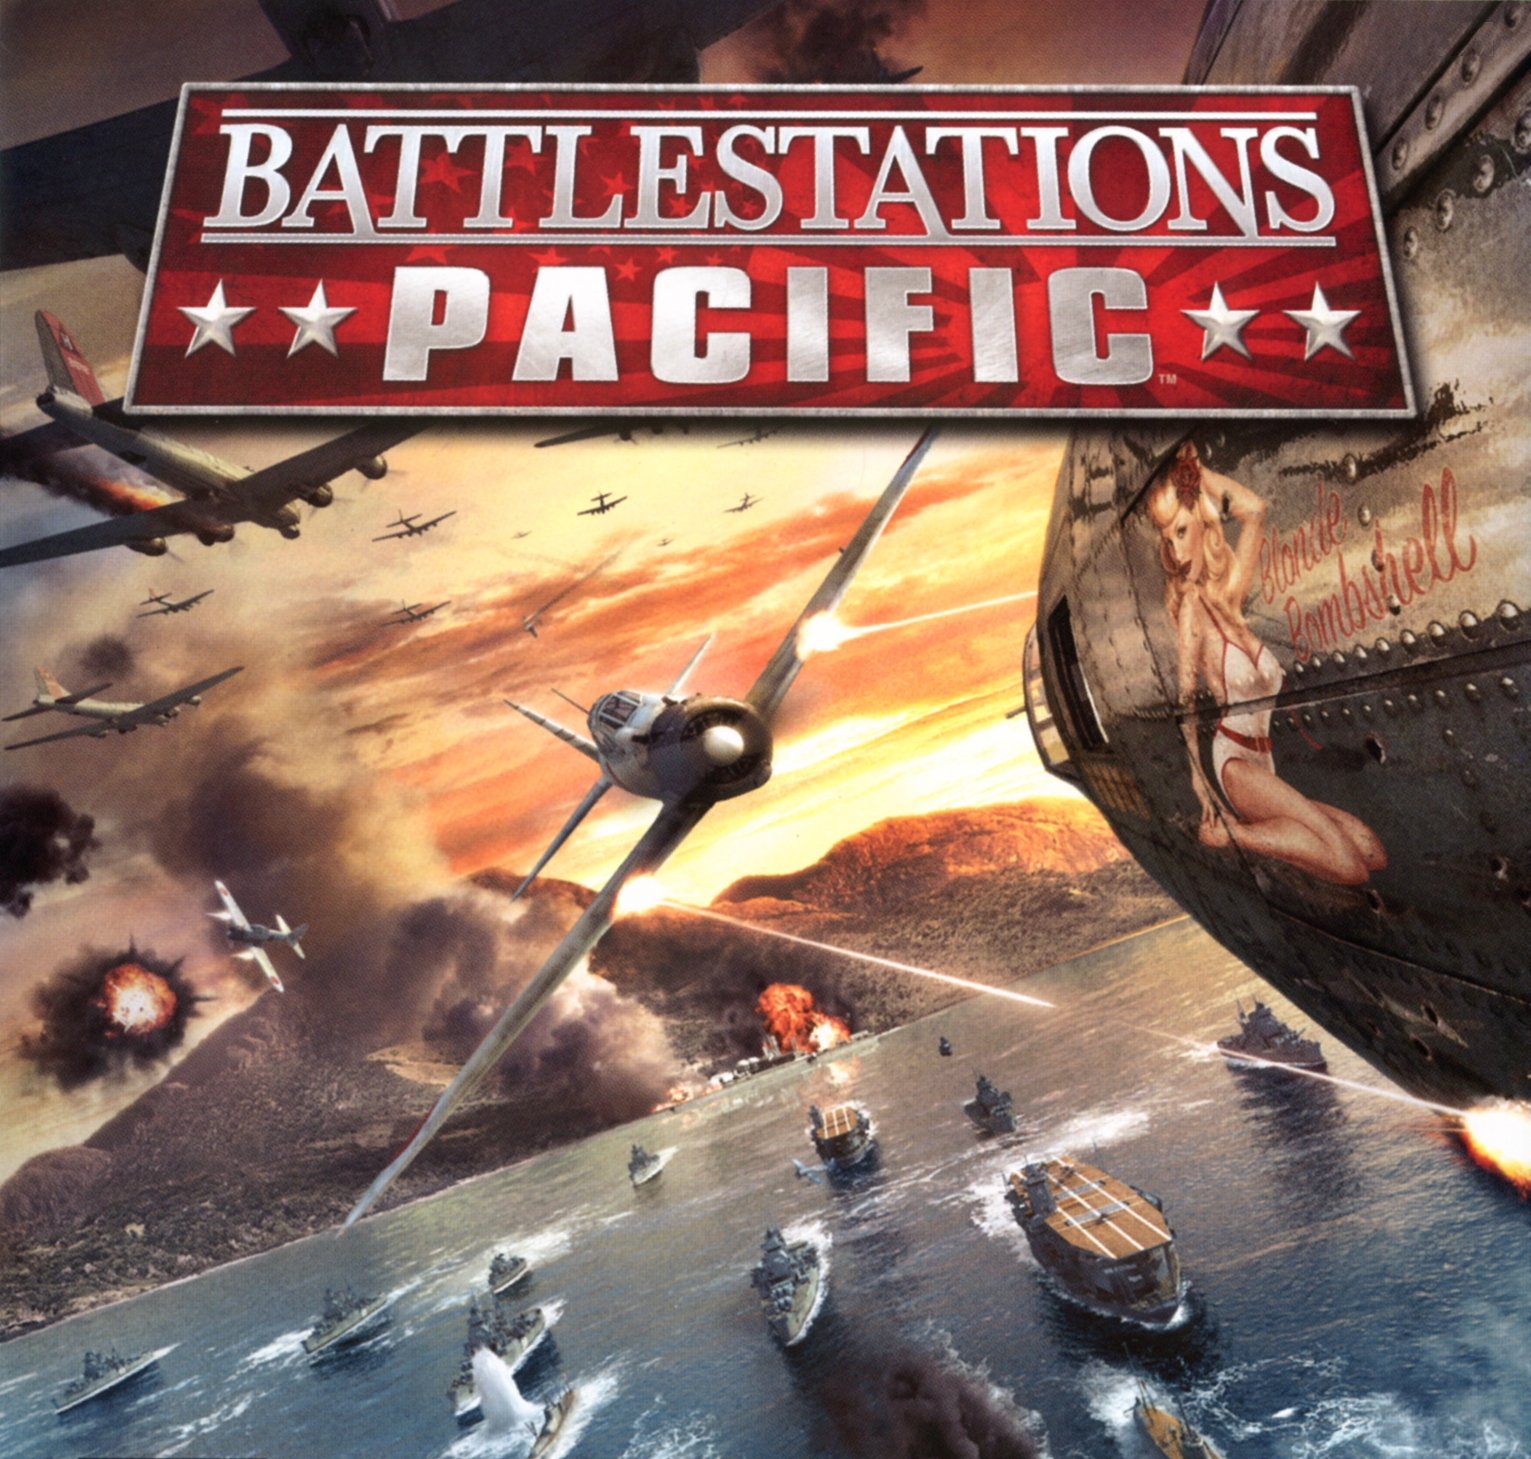 Battlestations Pacific Mods for Battlestations: Pacific